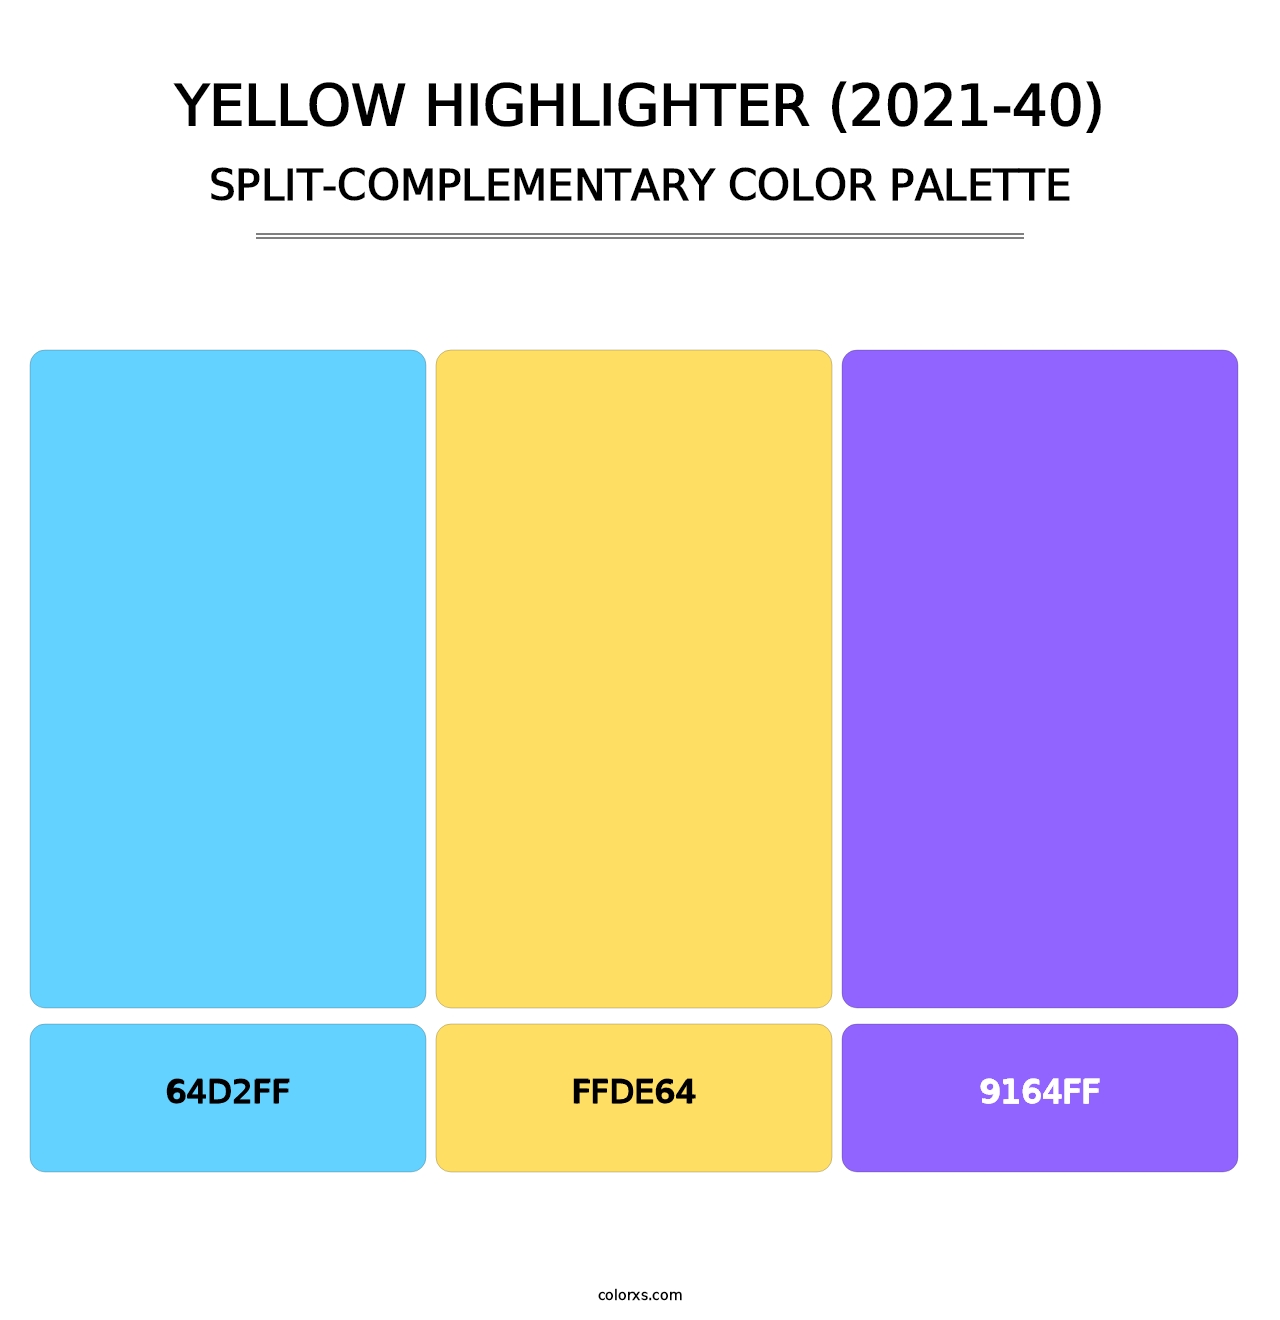 Yellow Highlighter (2021-40) - Split-Complementary Color Palette